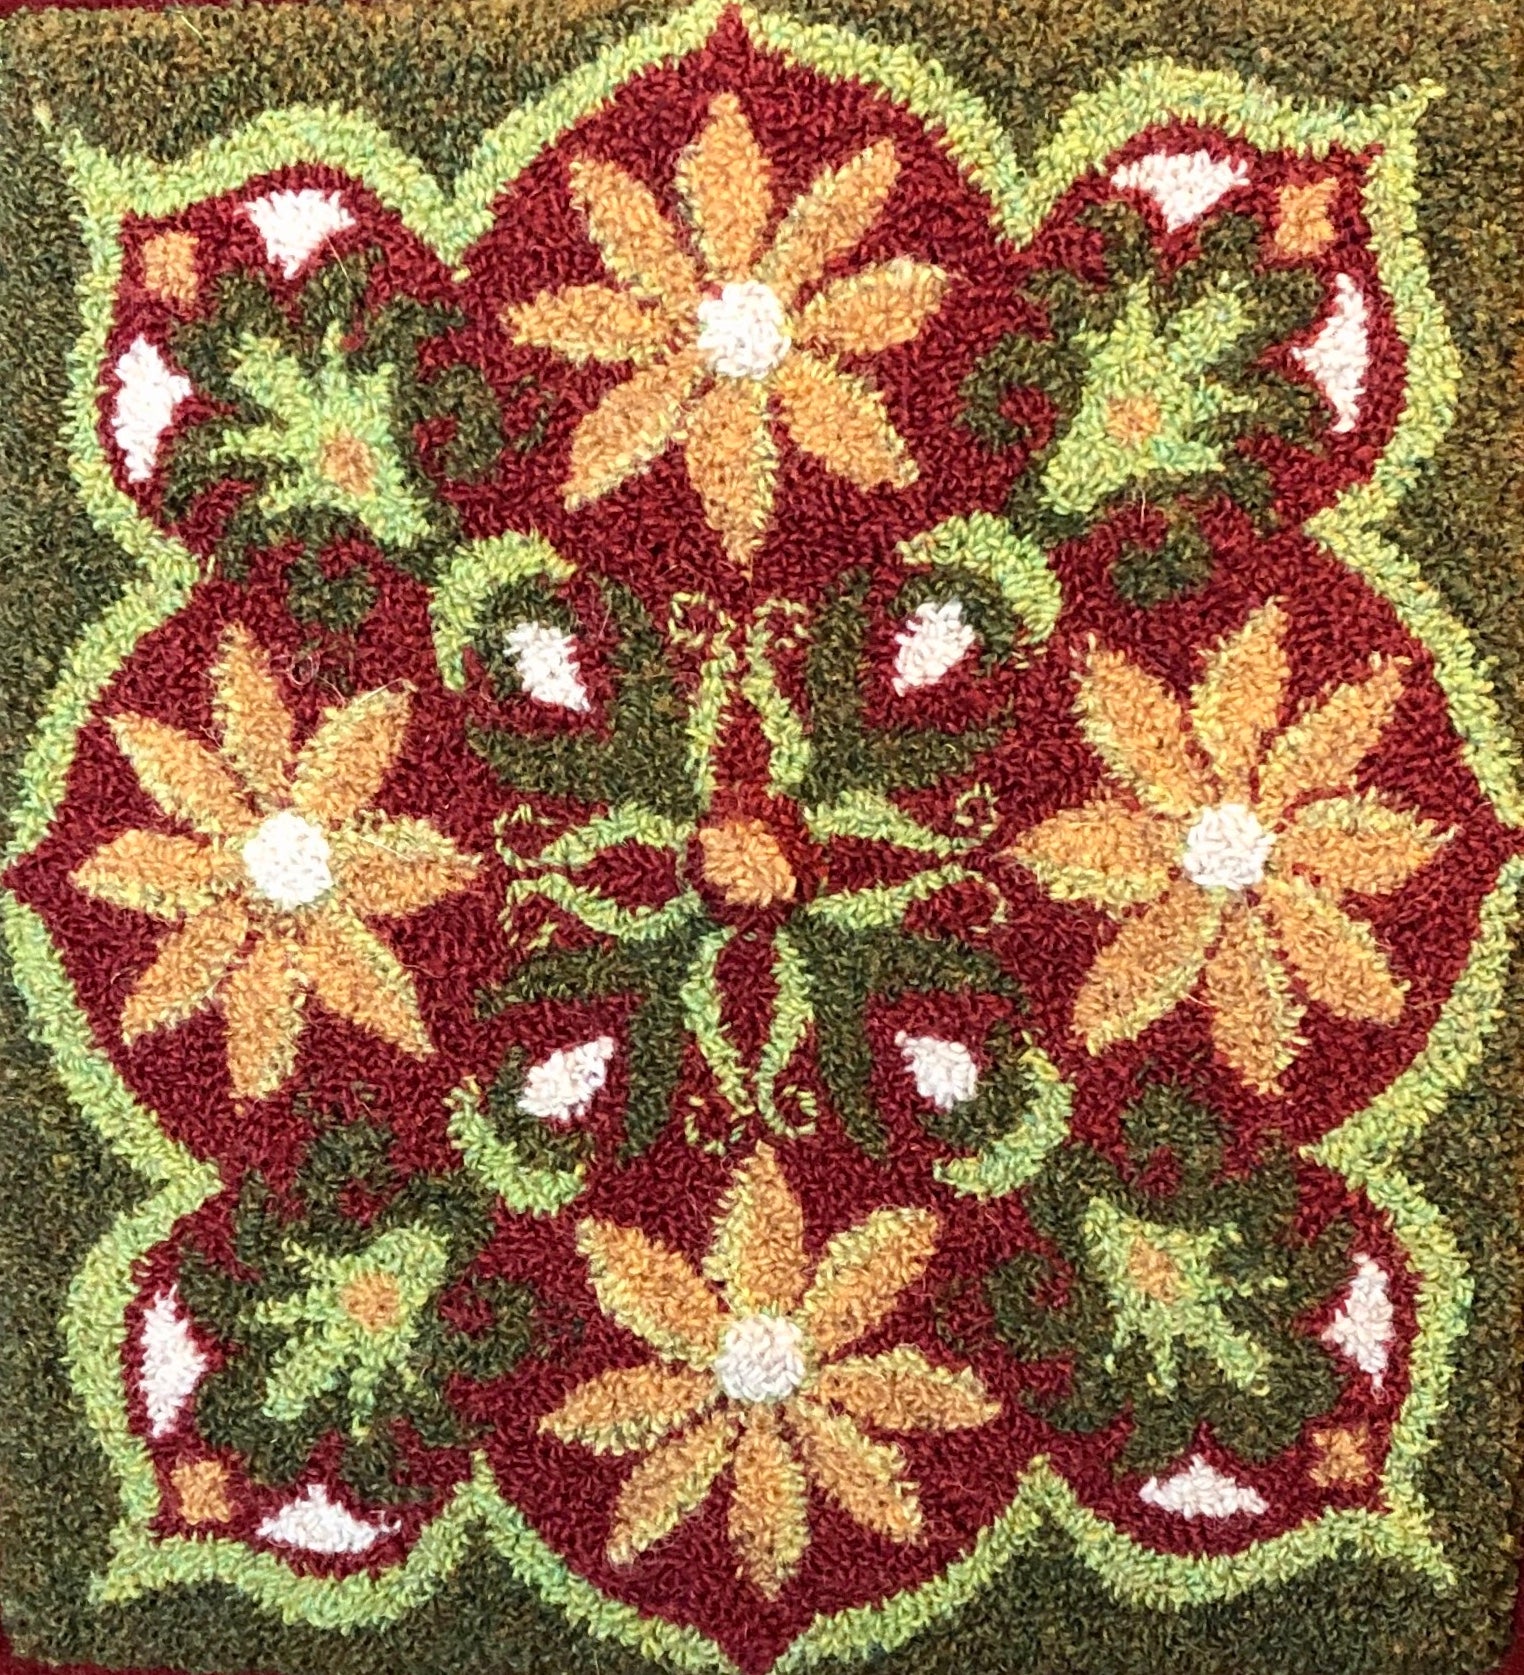 Serene- Punch Needle Pattern by Orphaned Wool . Patterns are available as Paper Punch Needle Patterns or Pattern on Weaver's Cloth Fabric. This is a lovely pattern to create a wall hanging or pillow design.